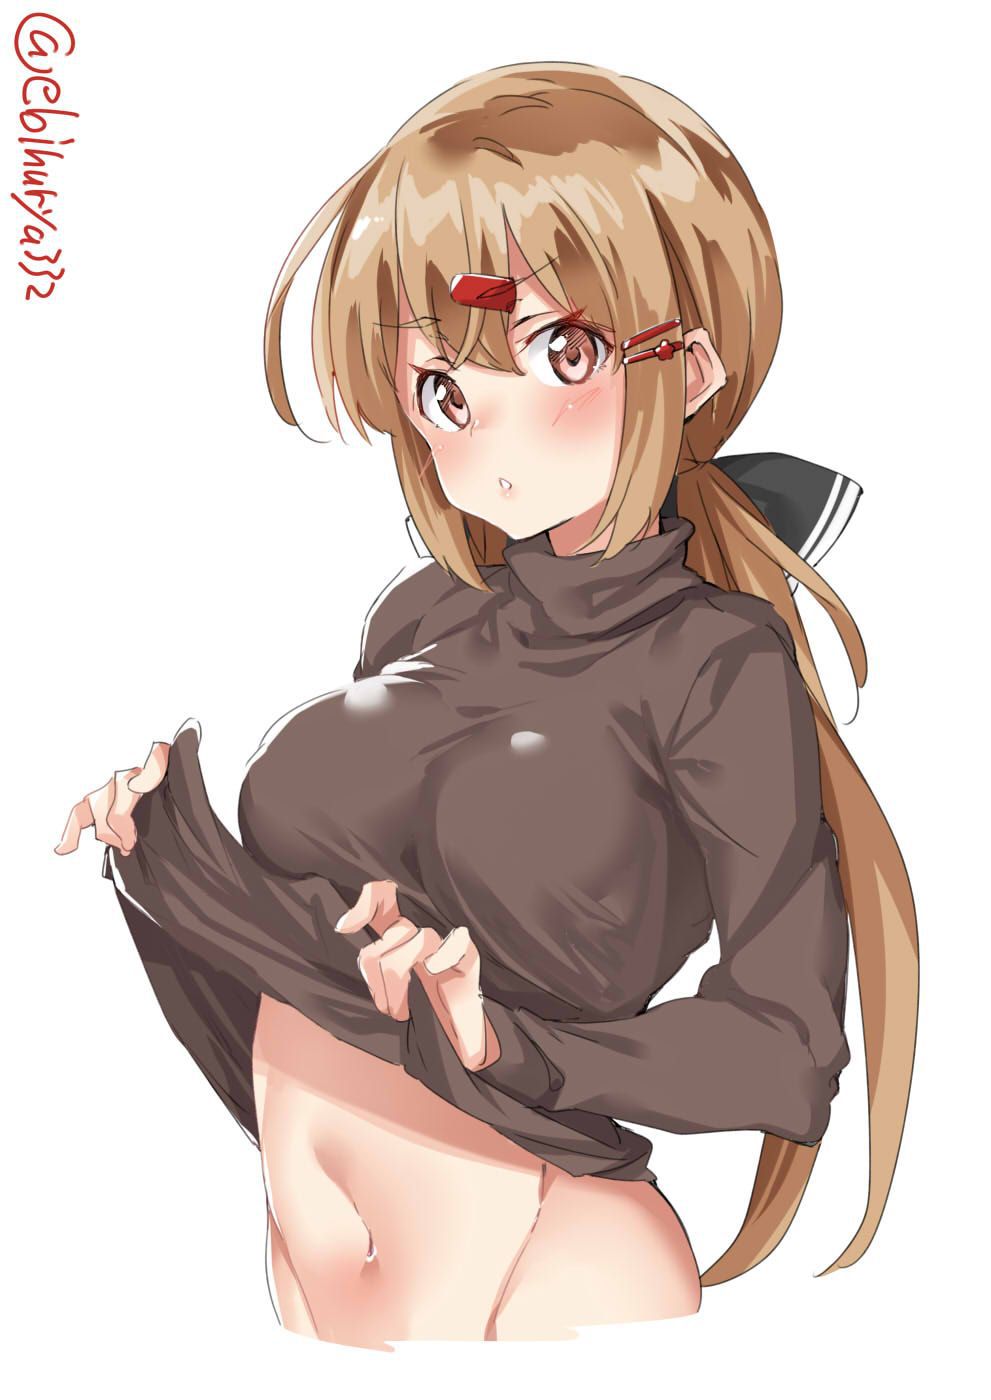 Kantai Photo Gallery people want to see! 14